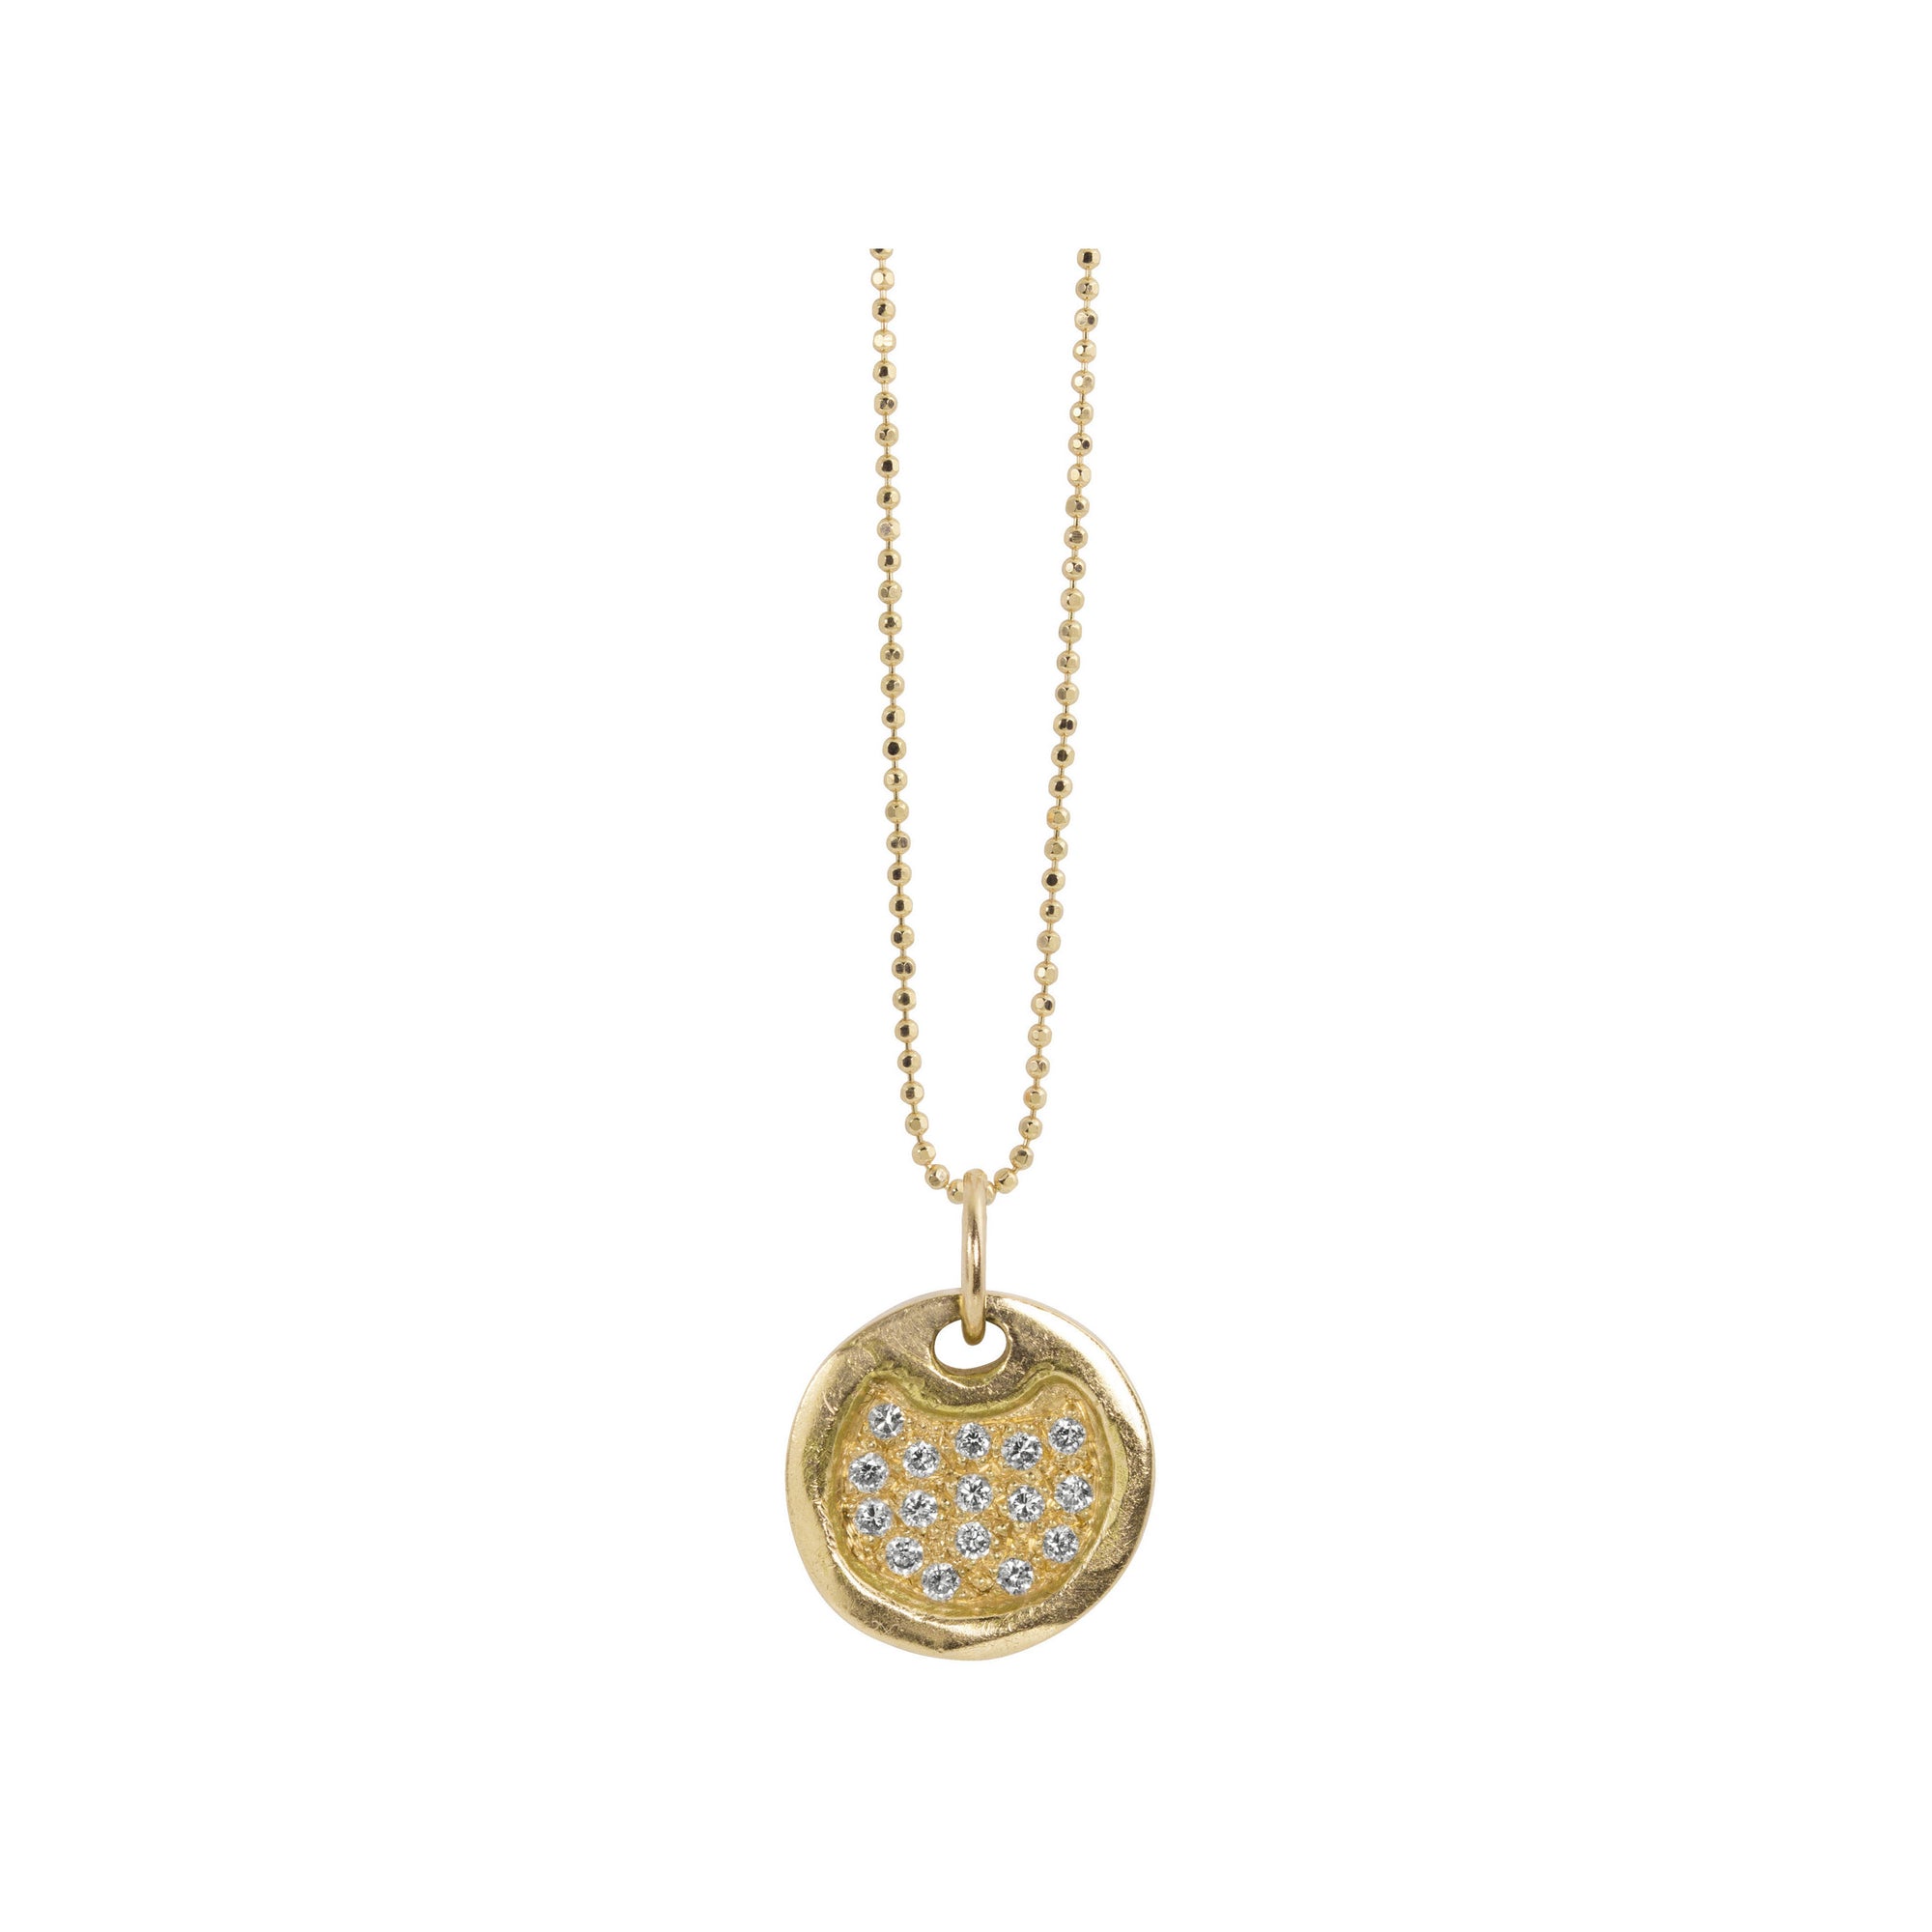 14k yellow gold baby DENA round dog tag with scattered diamonds